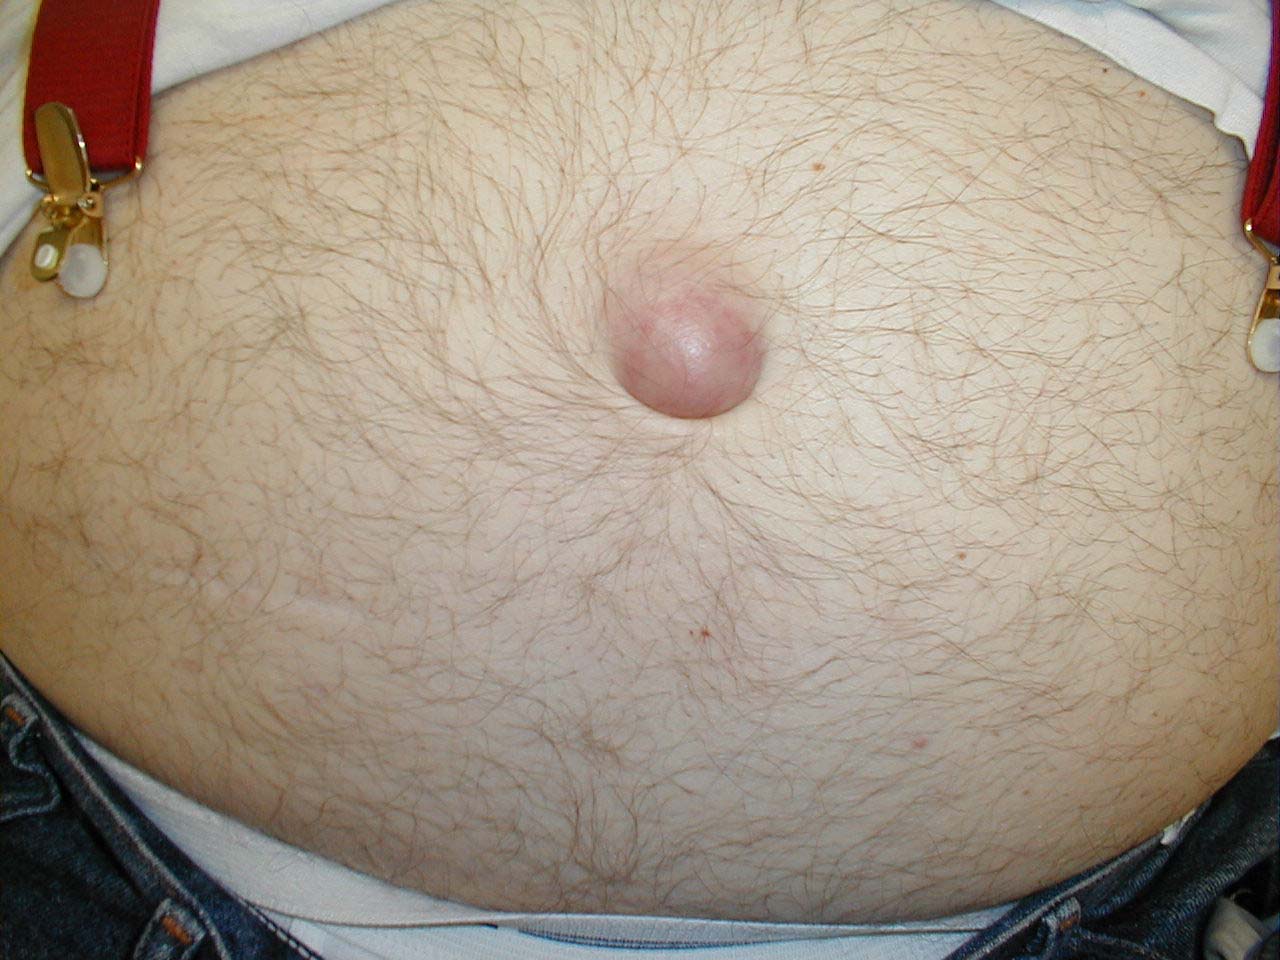 Incarcerated Umbilical Hernia: Note reddened umbilical area resulting from entrapment of intra-abdominal contents in hernia. When this occurred, the patient developed acute pain in this region.